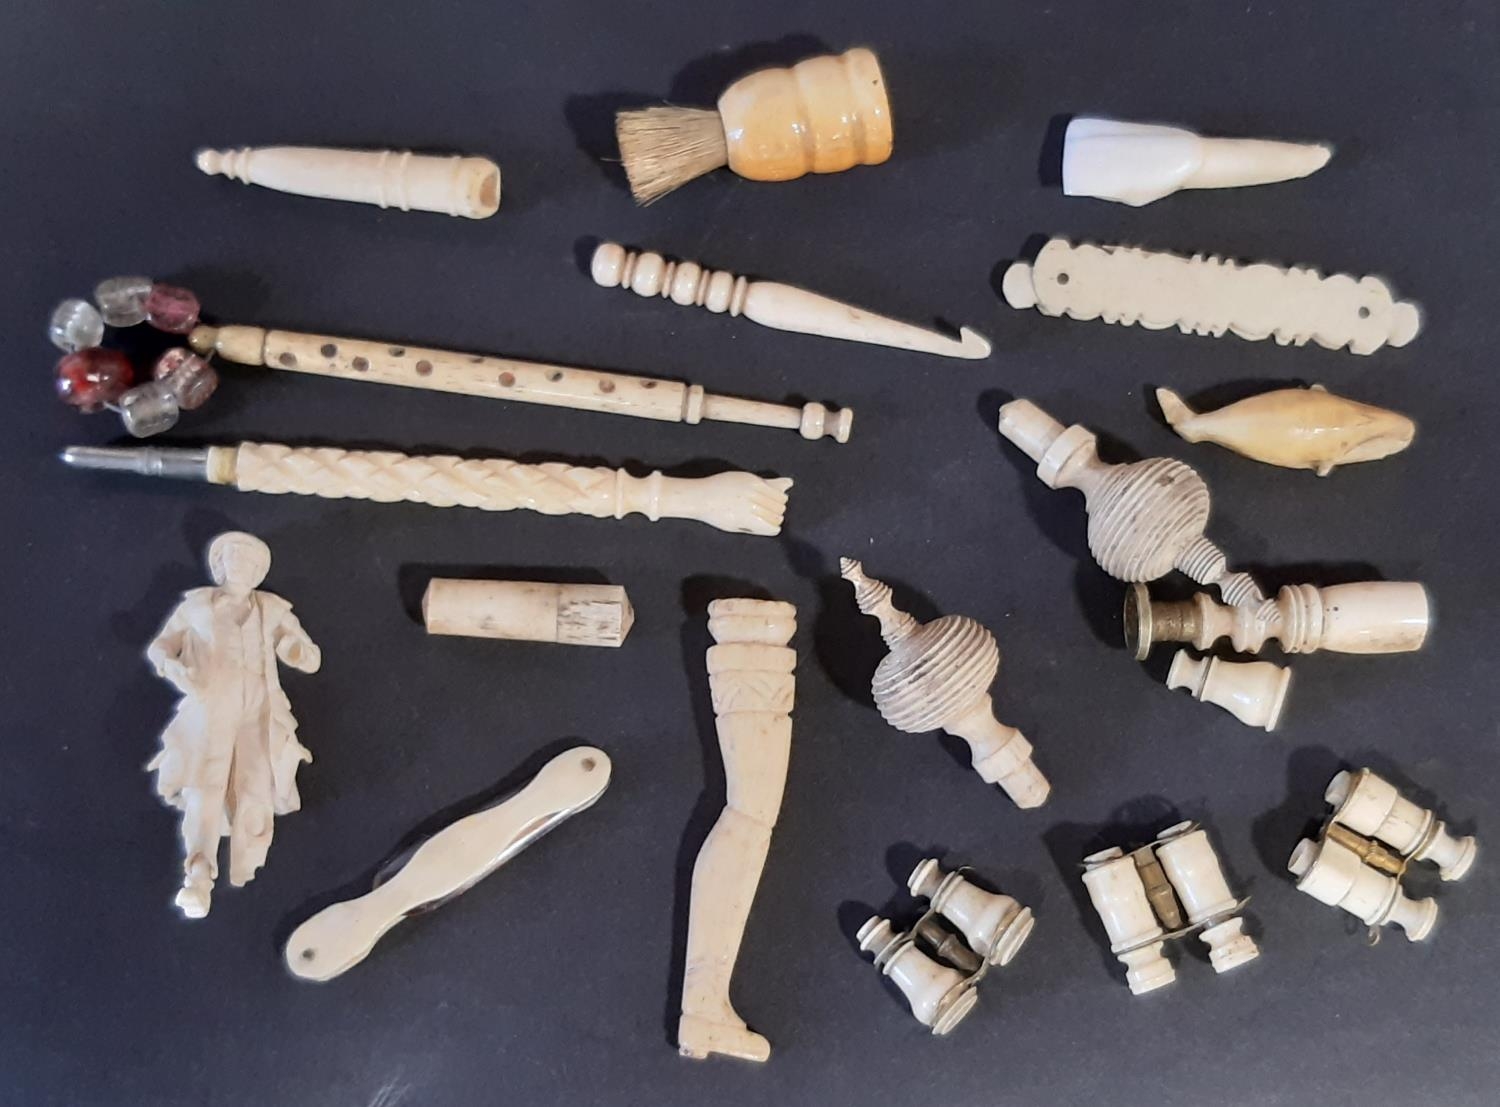 A collection of small turned bone objects to include Stanhopes, binoculars, whistle, etc